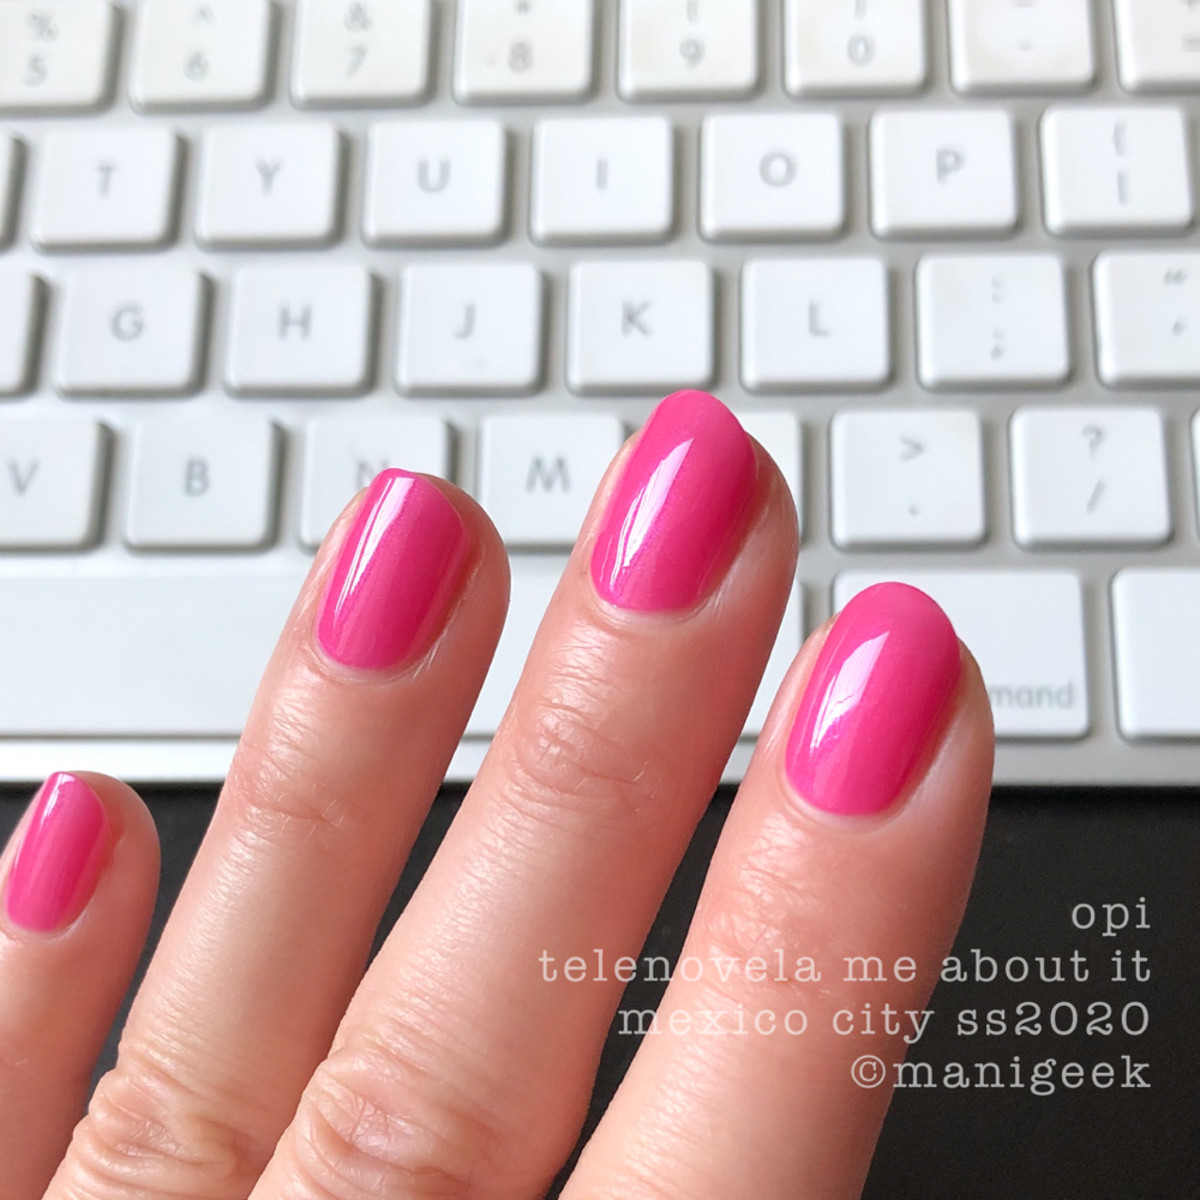 OPI Telenovela Me About It - OPI Mexico City Swatches Review 2020